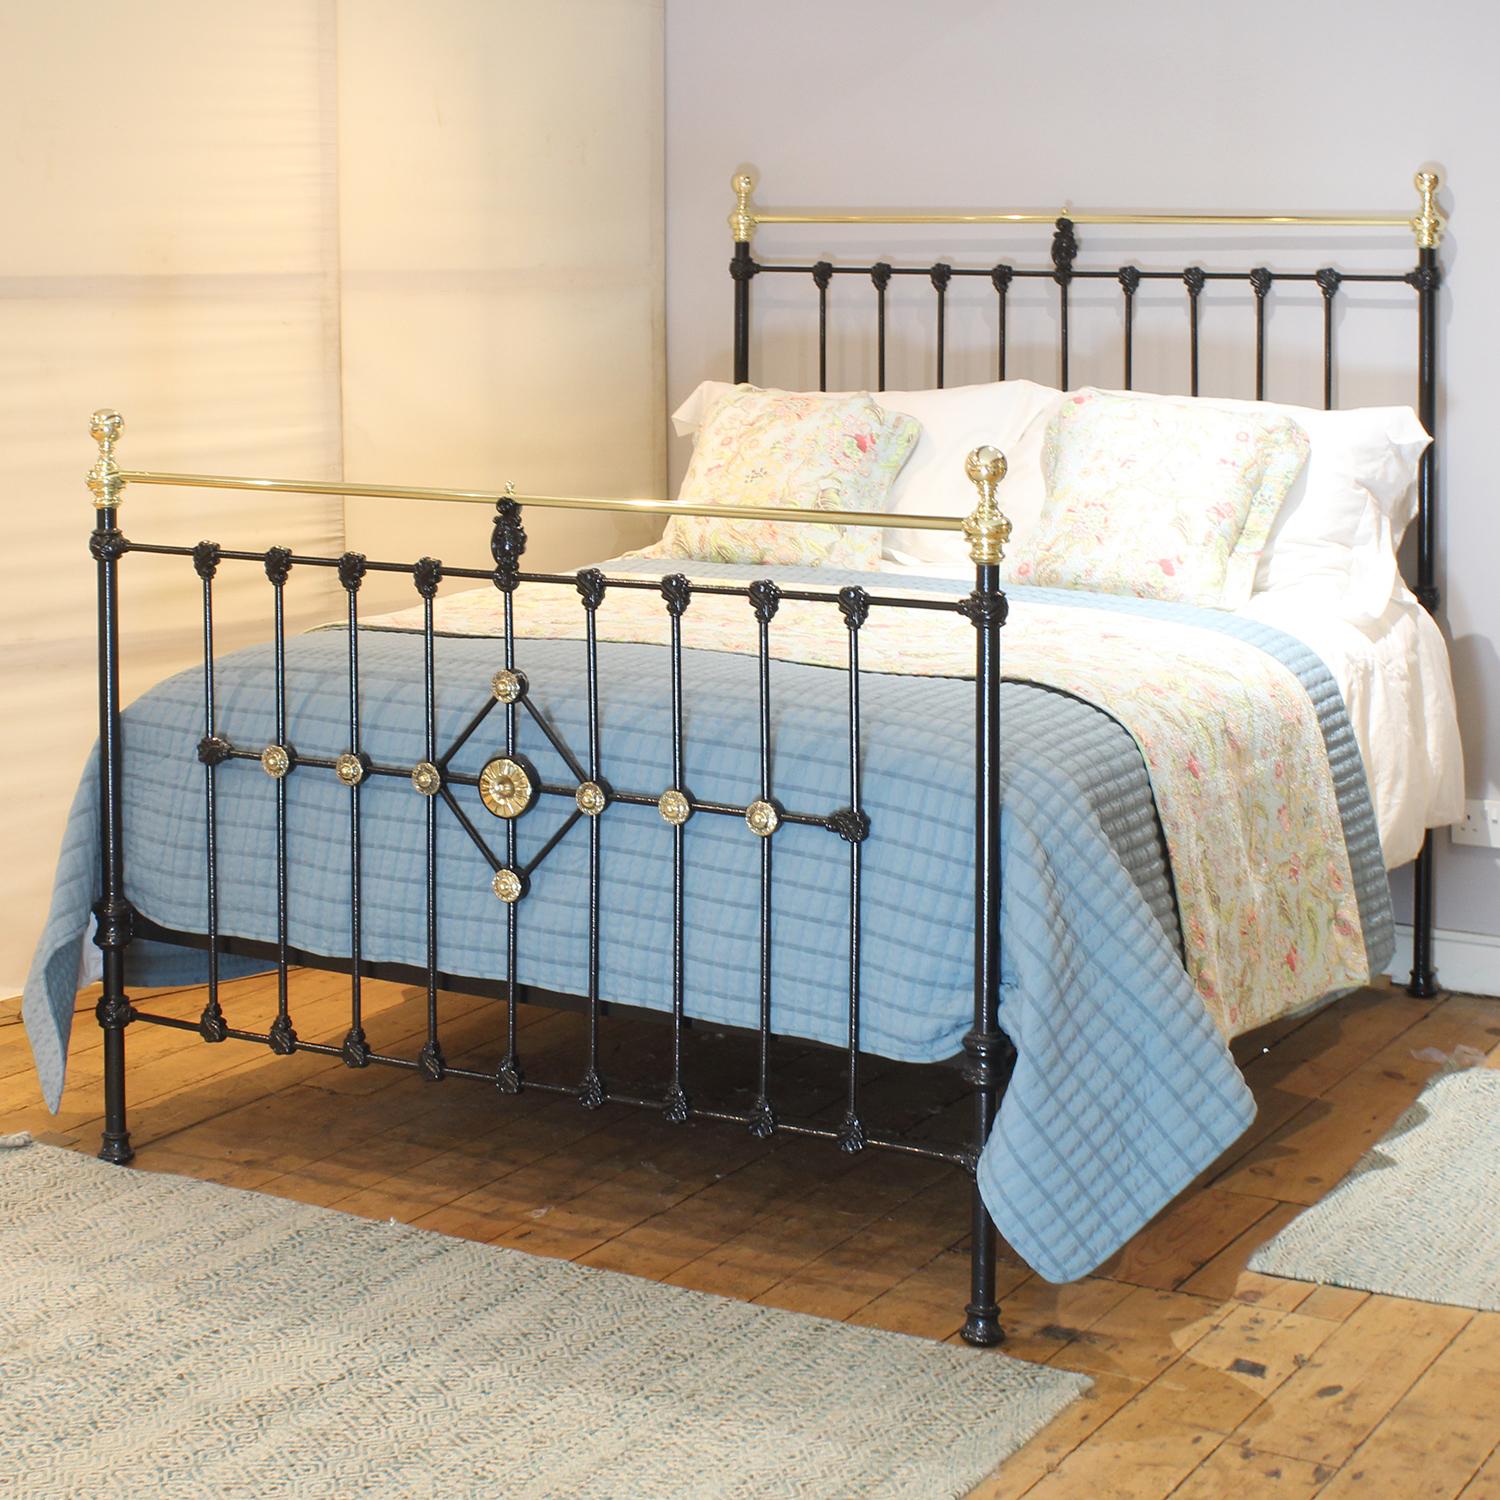 An attractive cast iron Victorian antique bed finished in black with rosette decoration on the foot panel.

This bed accepts a UK king size or US queen size (5ft, 60in or 150cm wide) base and mattress set.

The price includes a standard firm bed